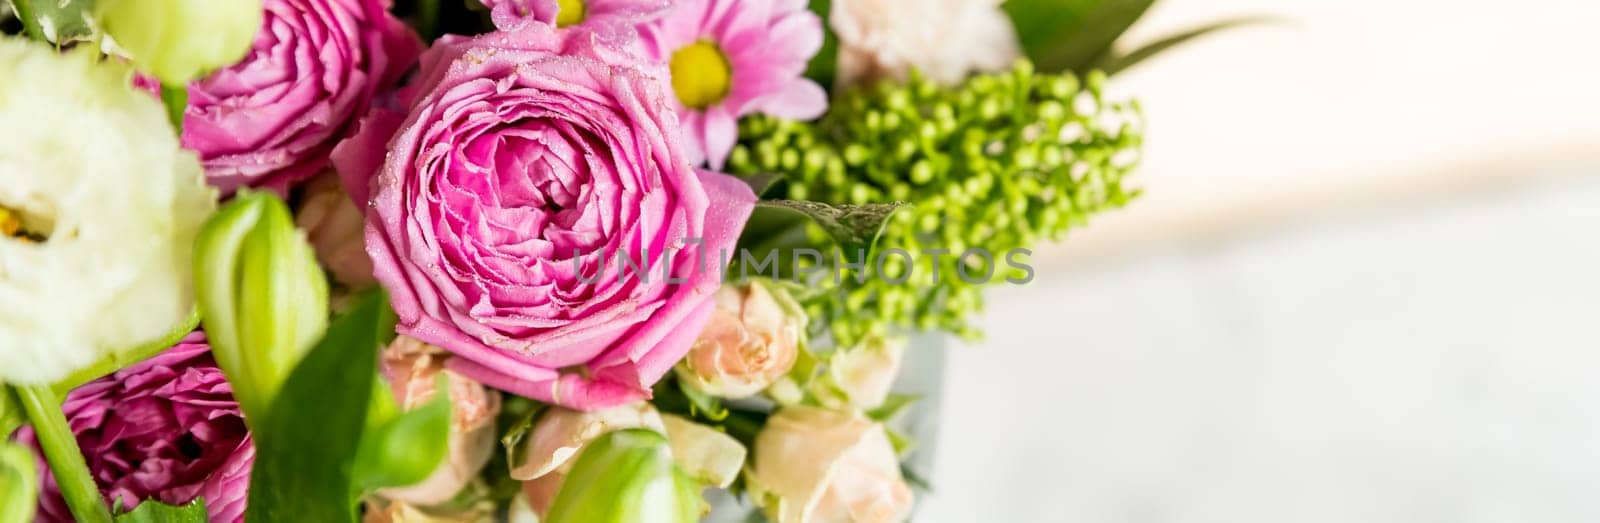 bouquet of roses, daisies, lisianthus, chrysanthemums, unopened buds on blurred background. Present. Mothers day, teachers day, holidays, web banner by YuliaYaspe1979